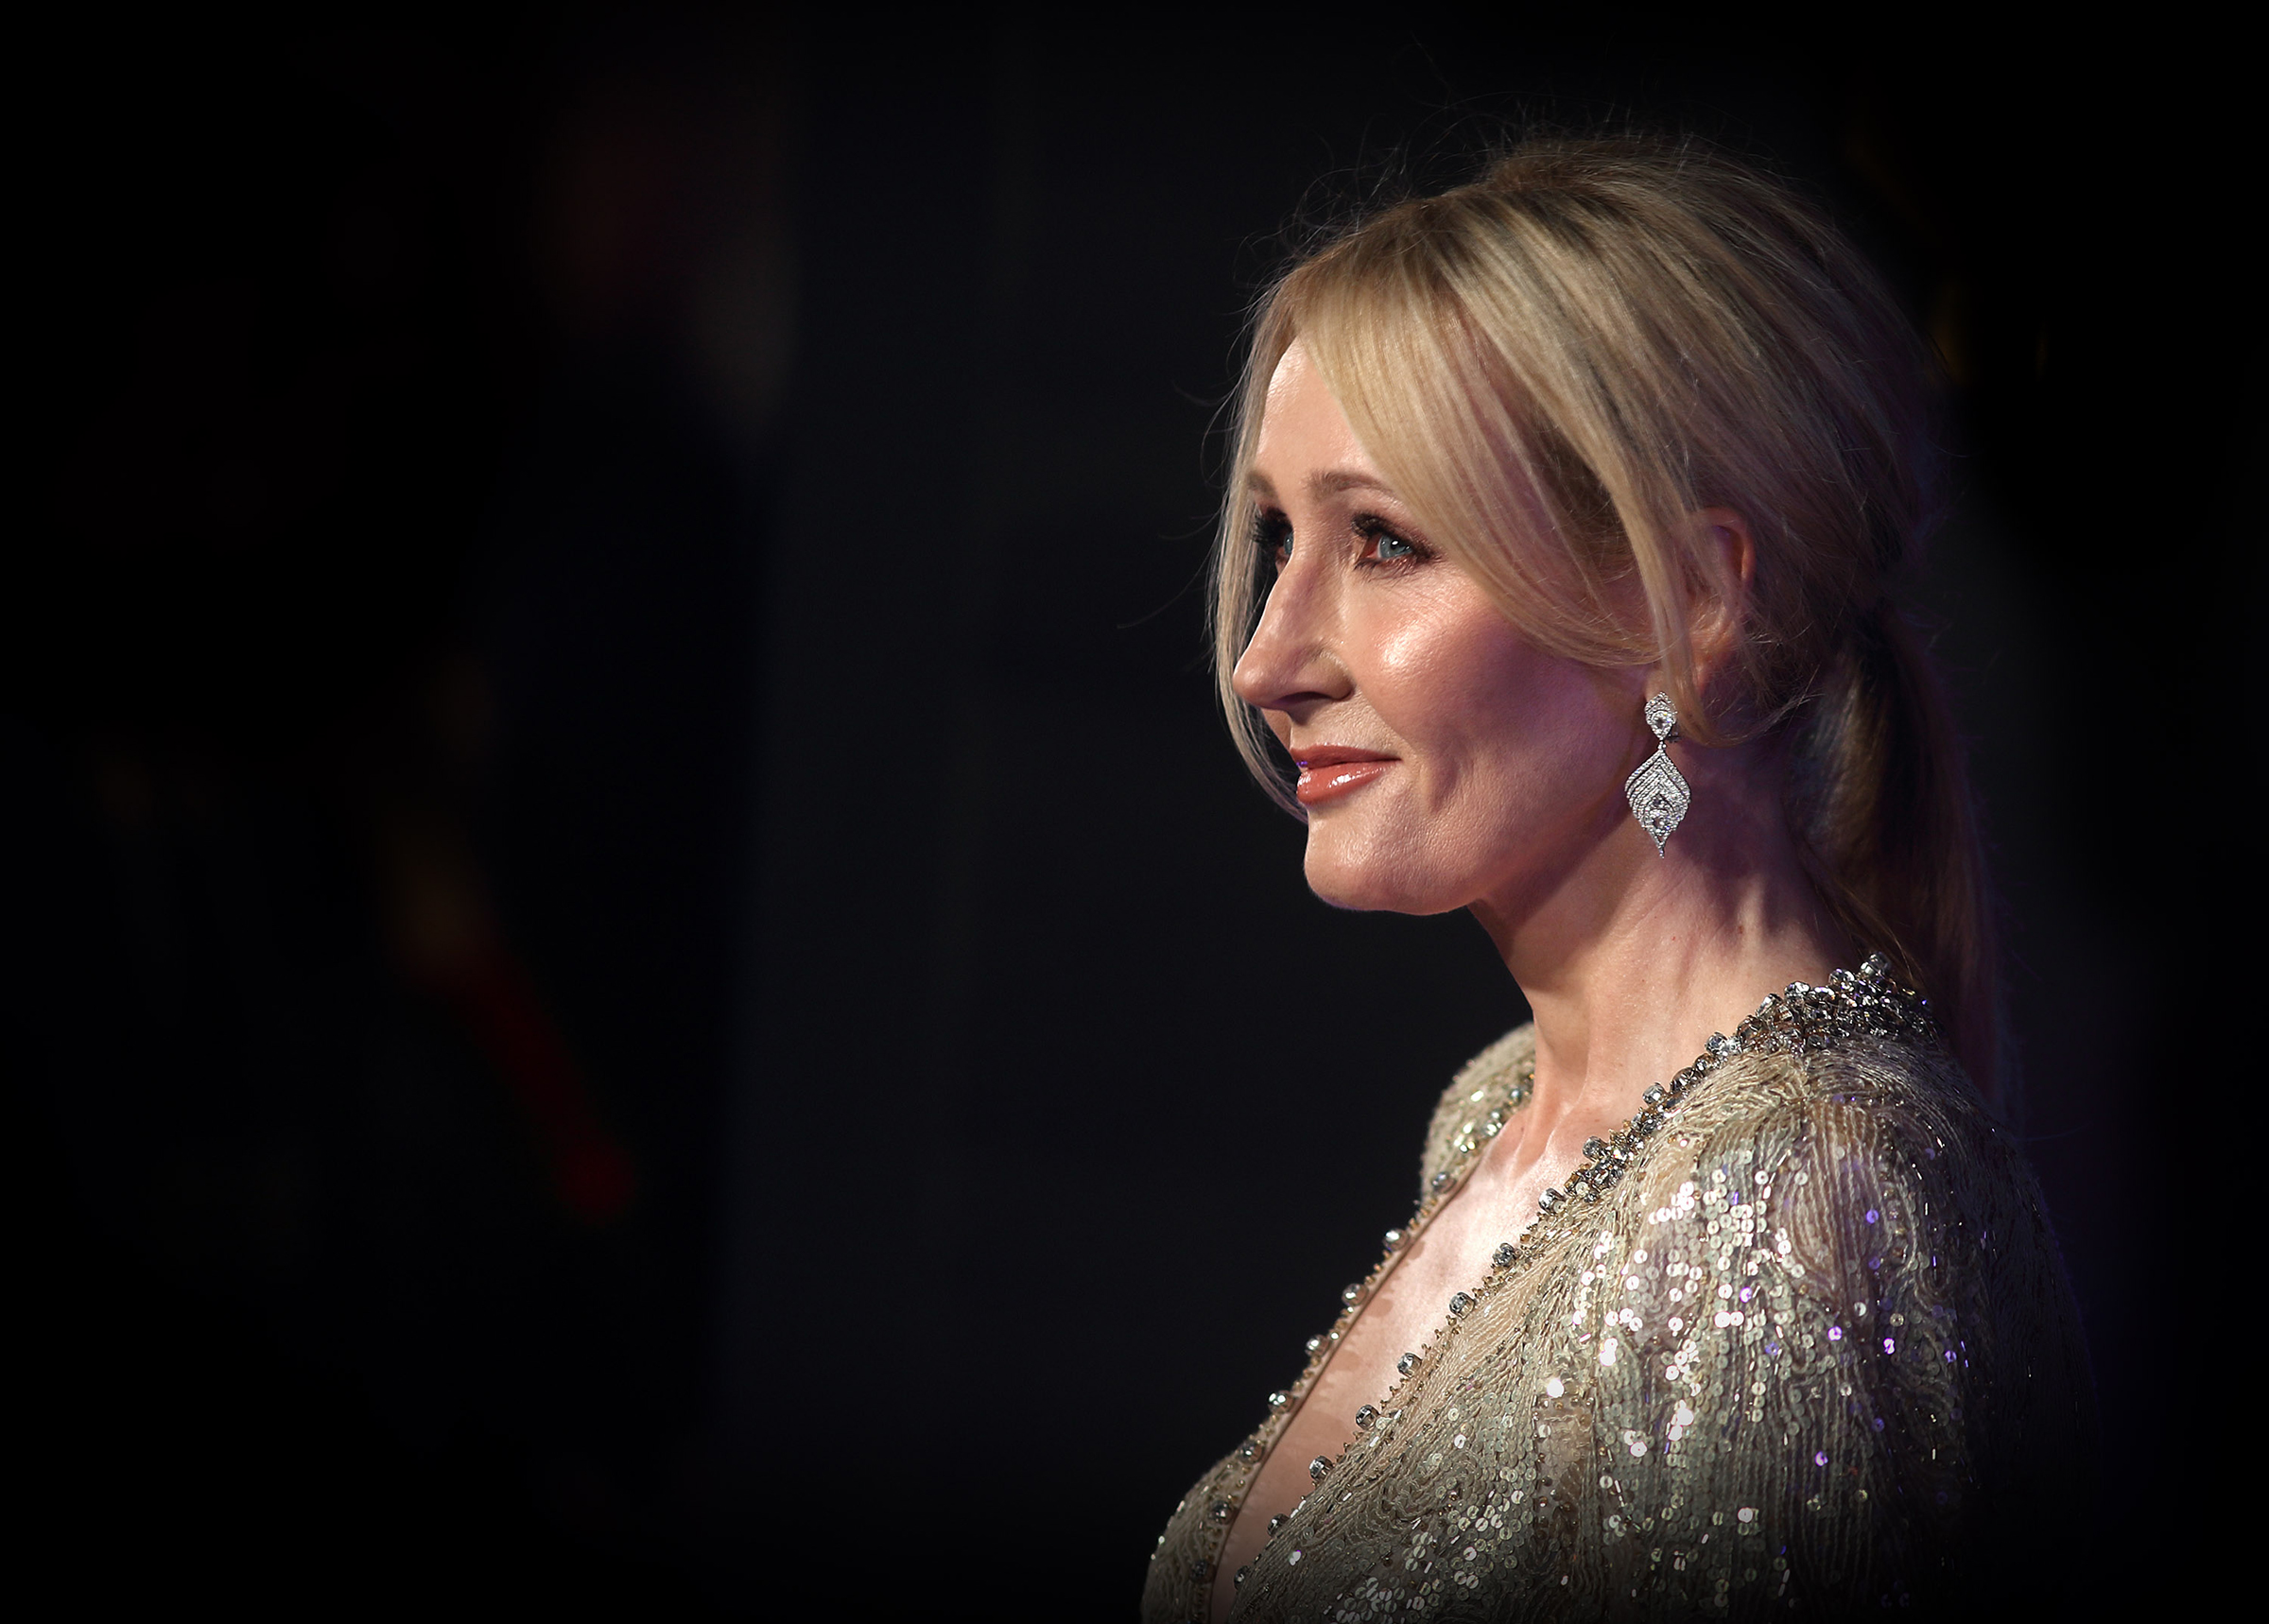 J.K. Rowling attends the European premiere of "Fantastic Beasts And Where To Find Them" at Odeon Leicester Square in London, England on Nov. 15, 2017. (Mike Marsland—WireImage/Getty Images)